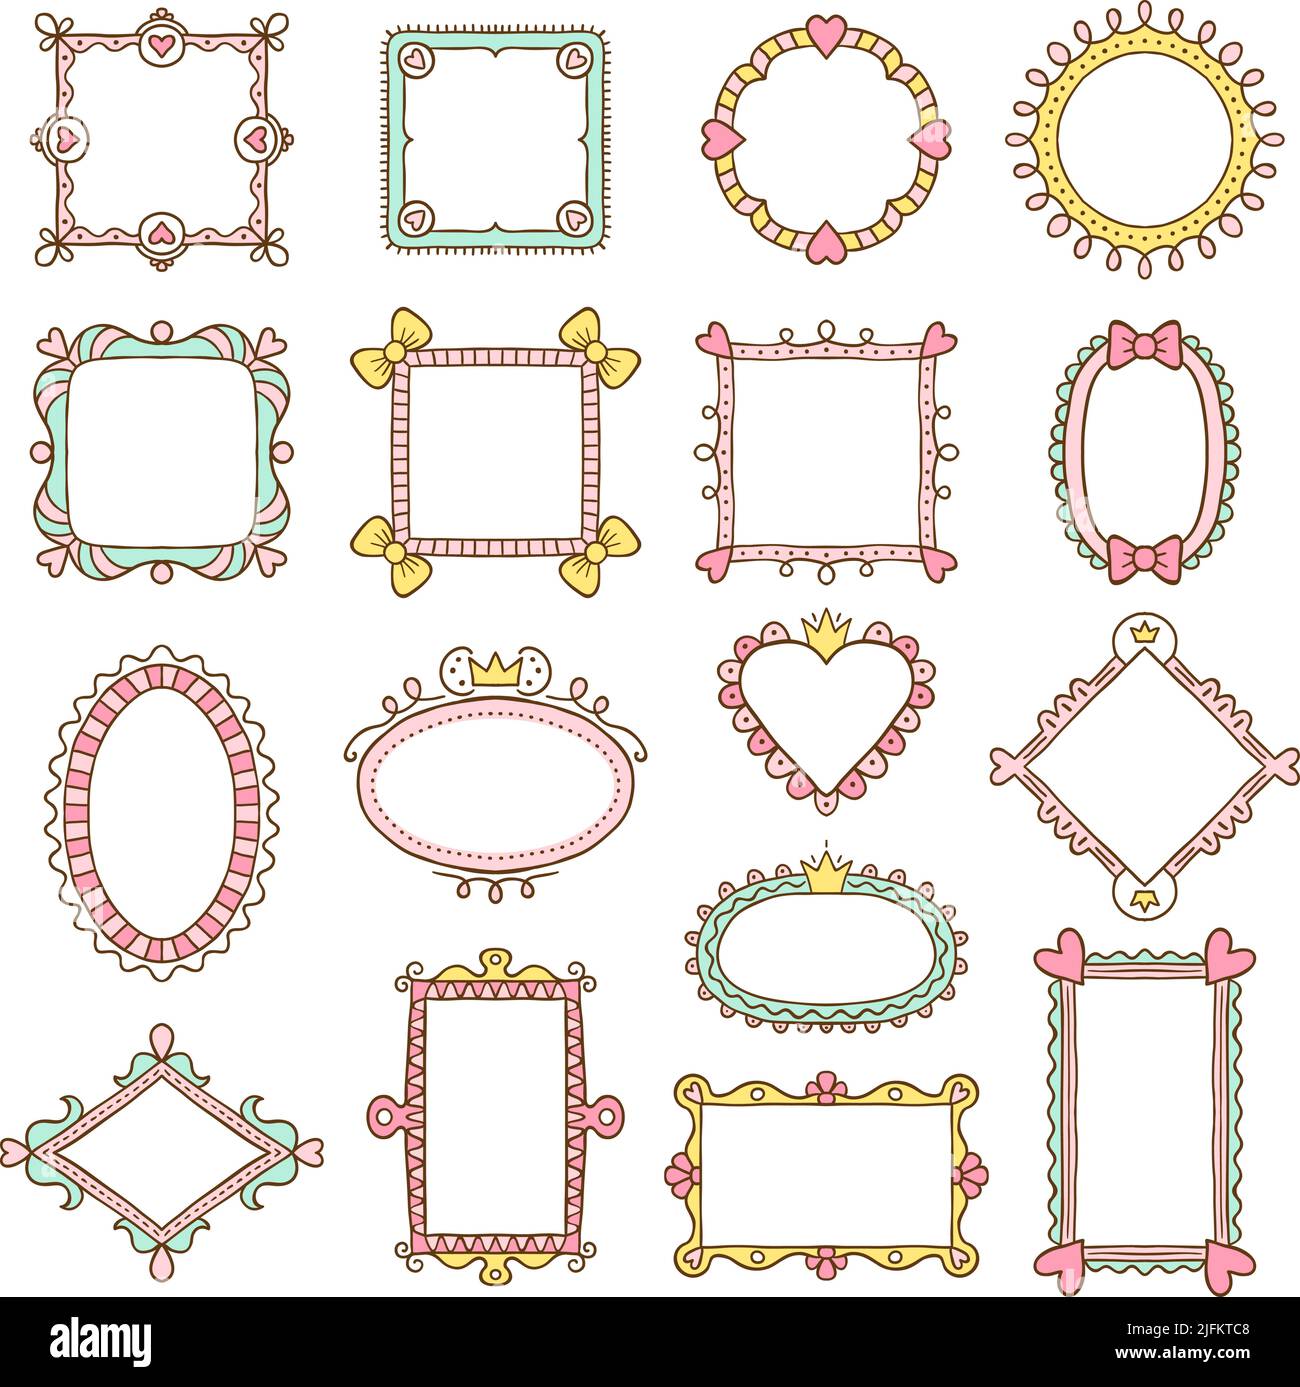 Frames templates. Cute decorative sketchy geometrical frames for photos and scrapbooks recent vector colored set Stock Vector